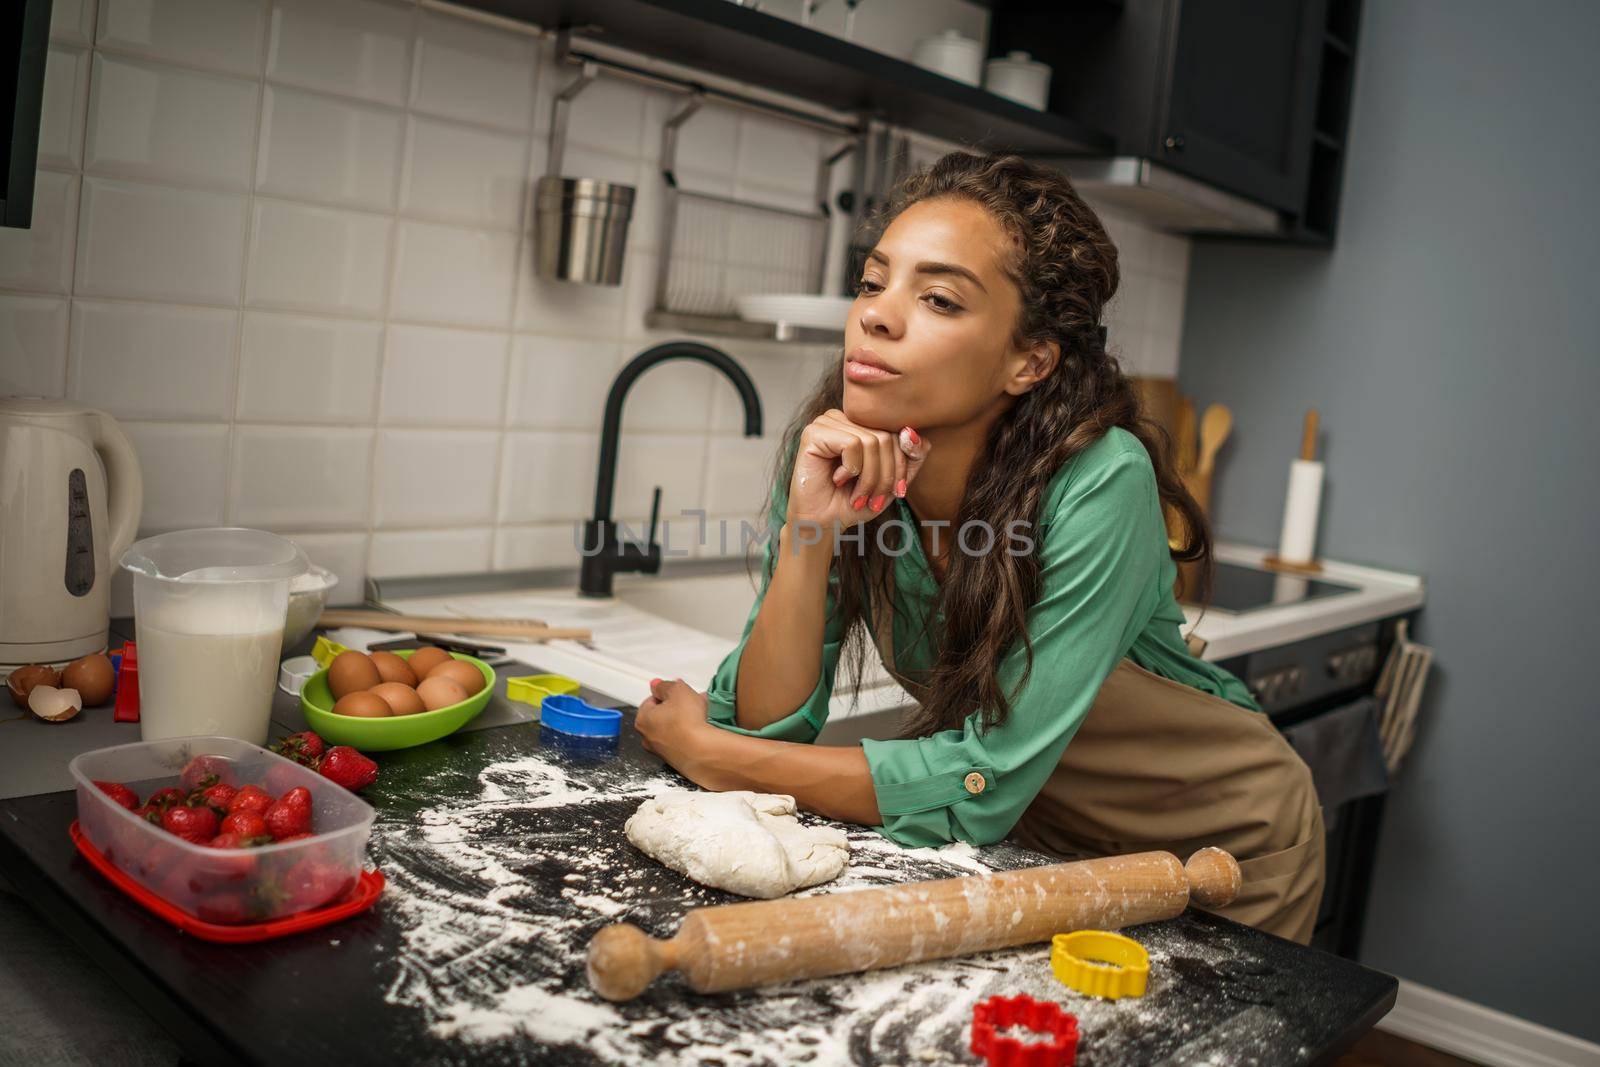 Young african-american woman is making cookies in her kitchen. She is tired of cooking.